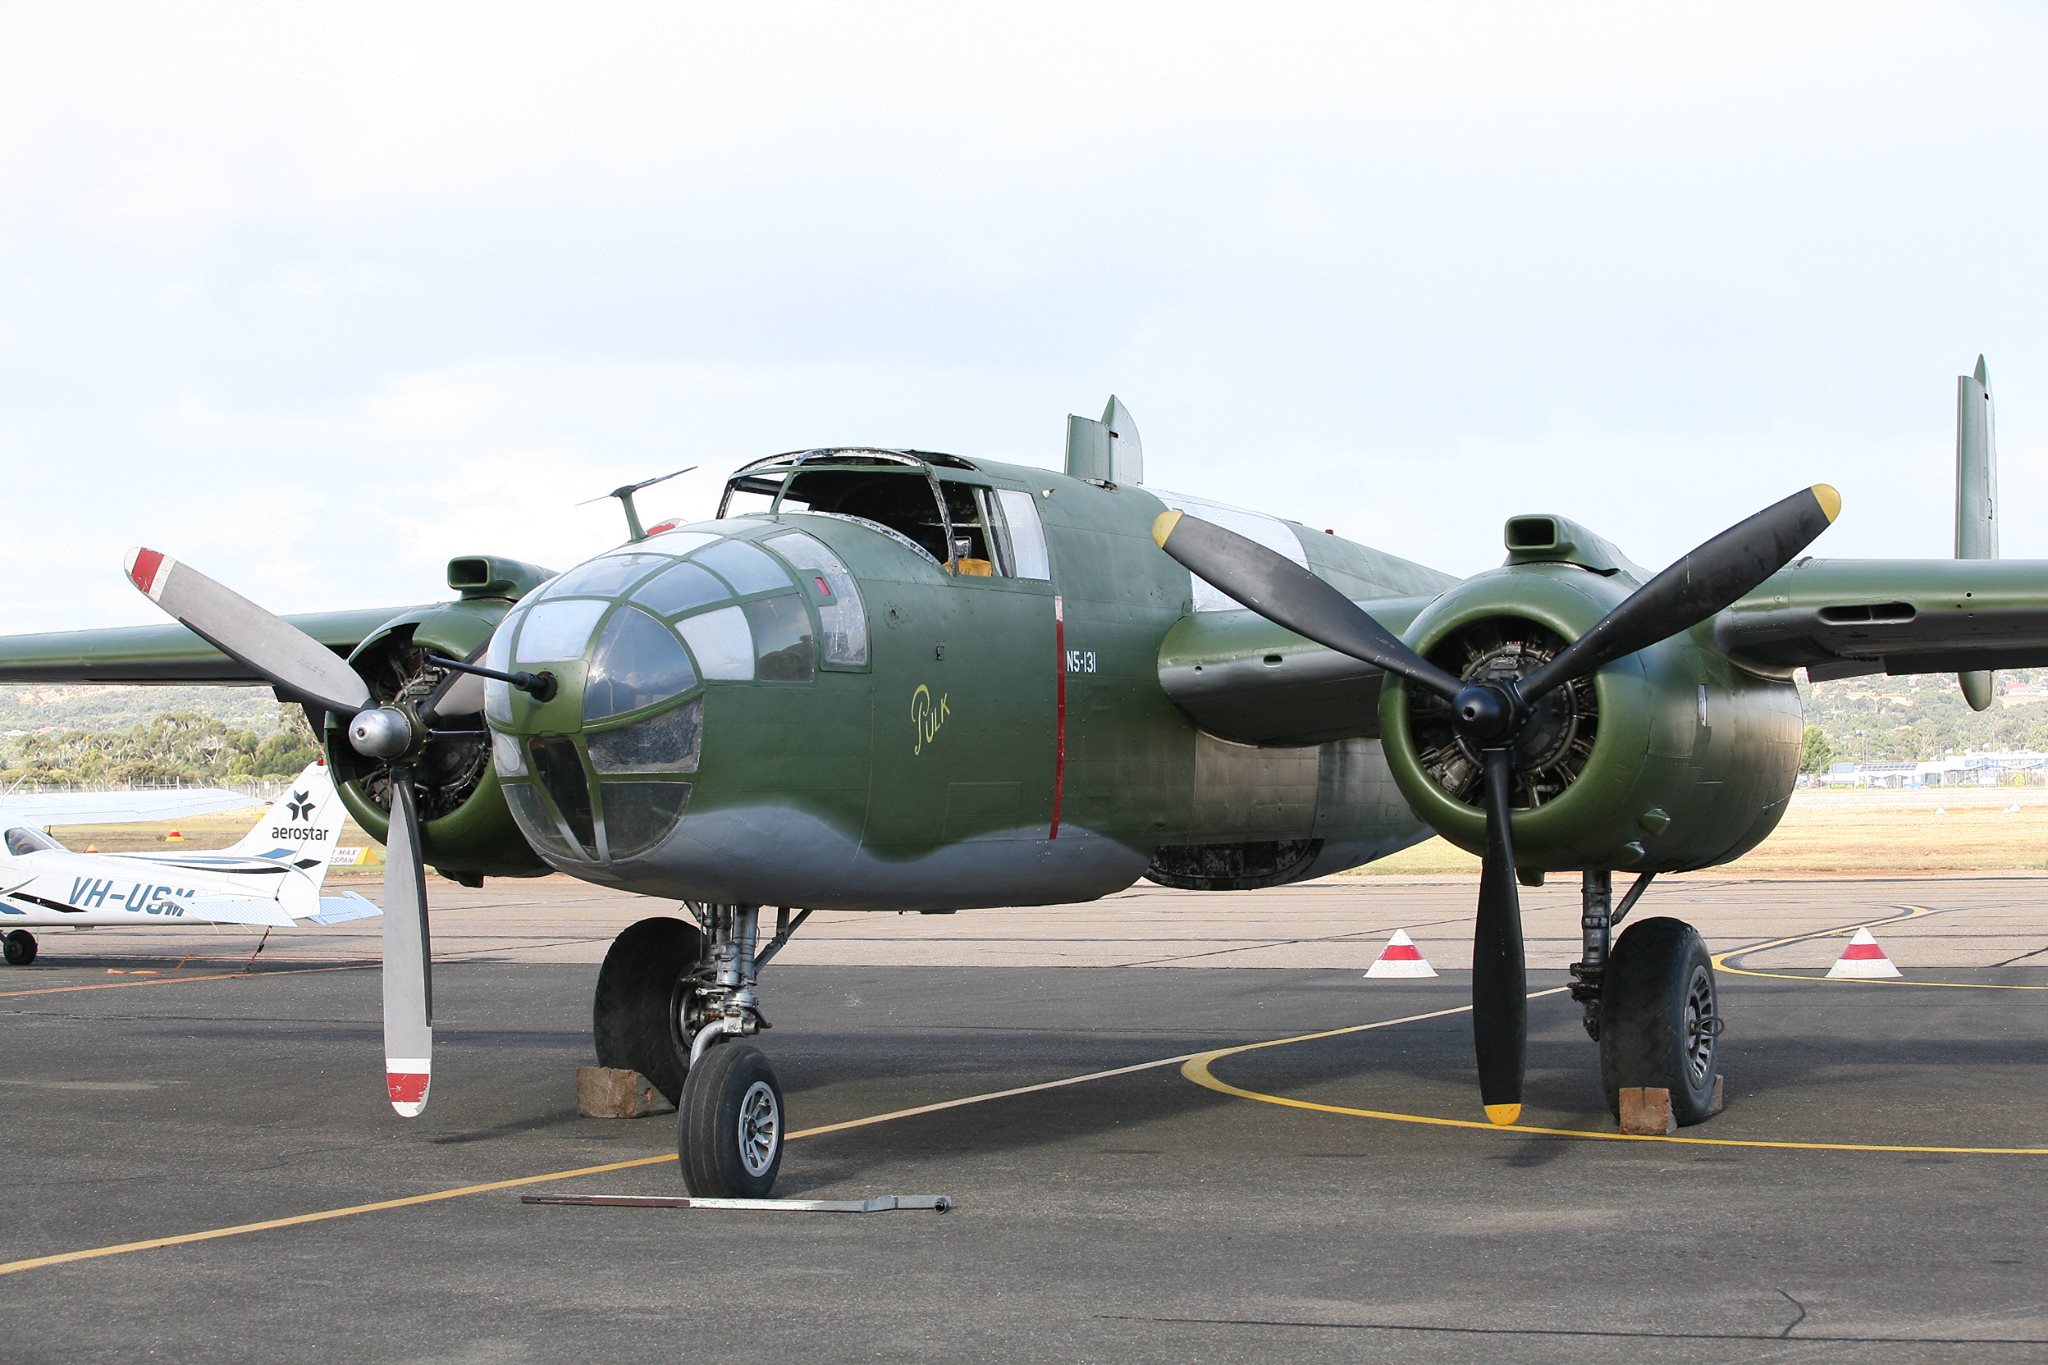 Reevers B-25 at her rollout ceremony in April this year. There is still much work to do, but she has come forwards very quickly from where she once was. (Photo via Reevers)